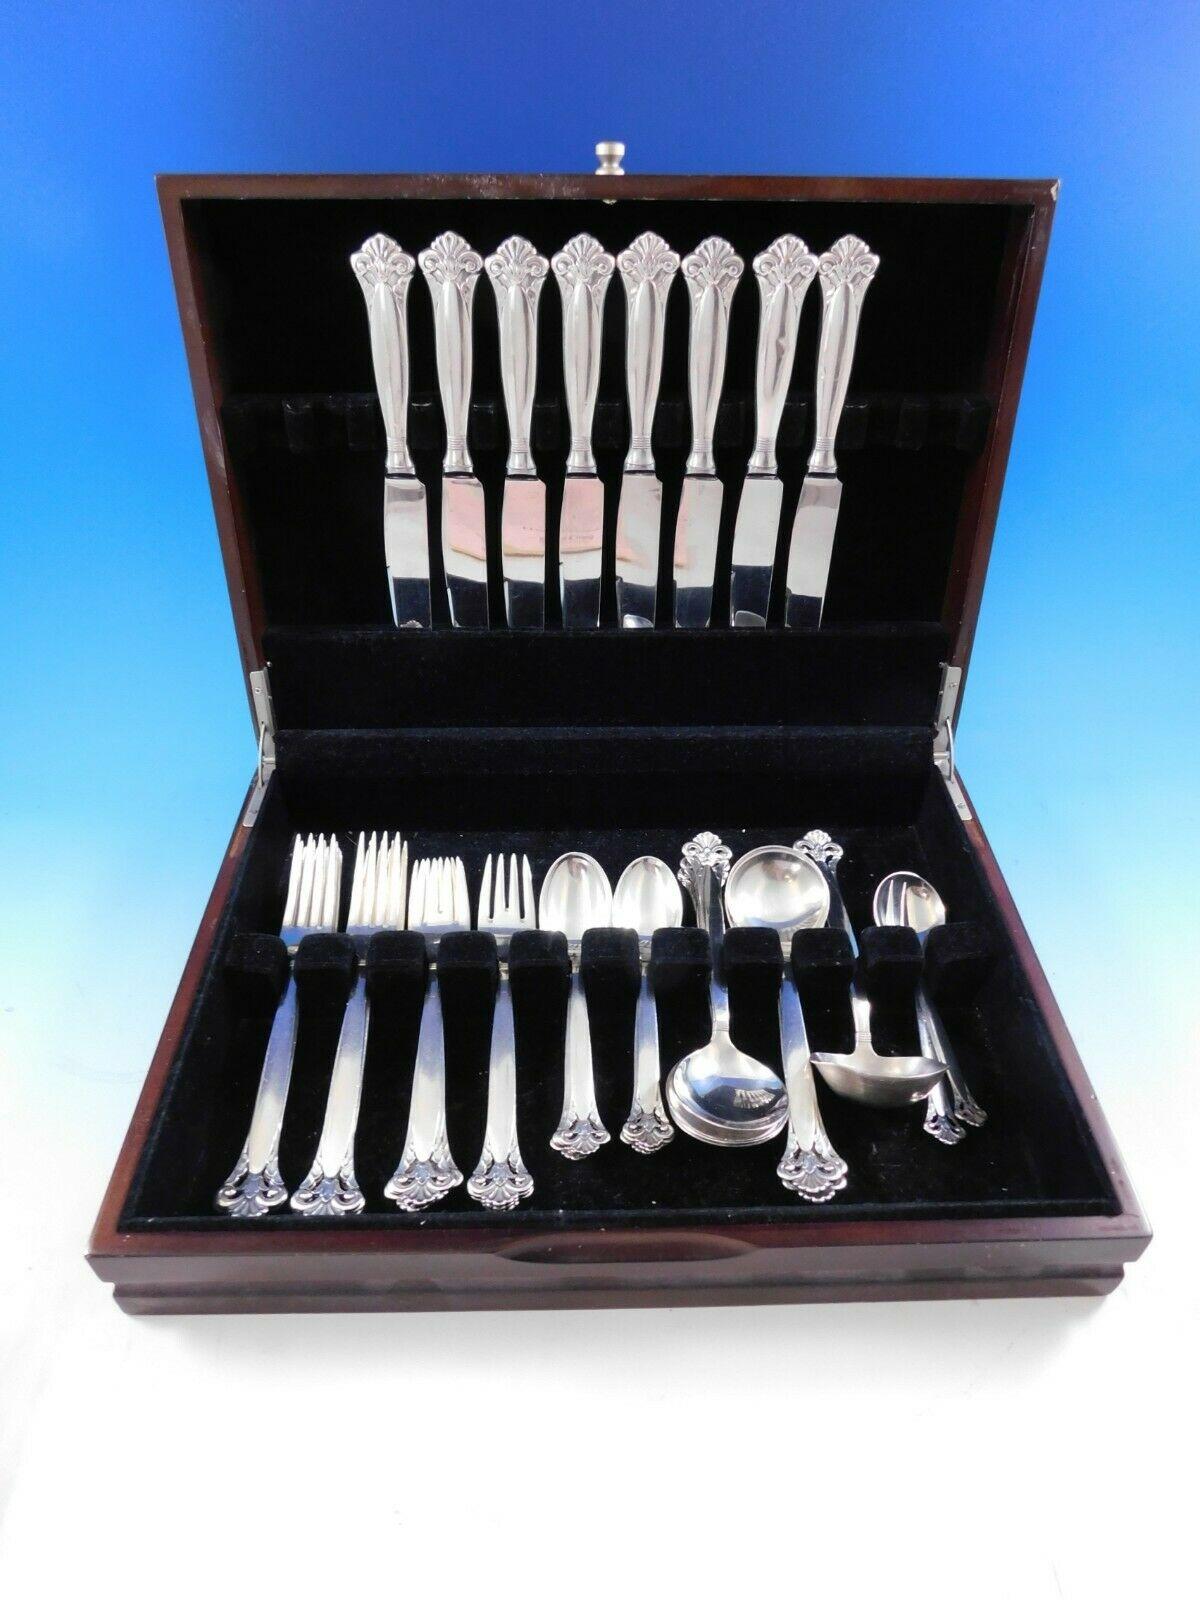 Cloister by Th. Marthinsen (Norway) sterling silver flatware set with pierced handle, 43 pieces. This set includes:

8 dinner knives, 9 1/2